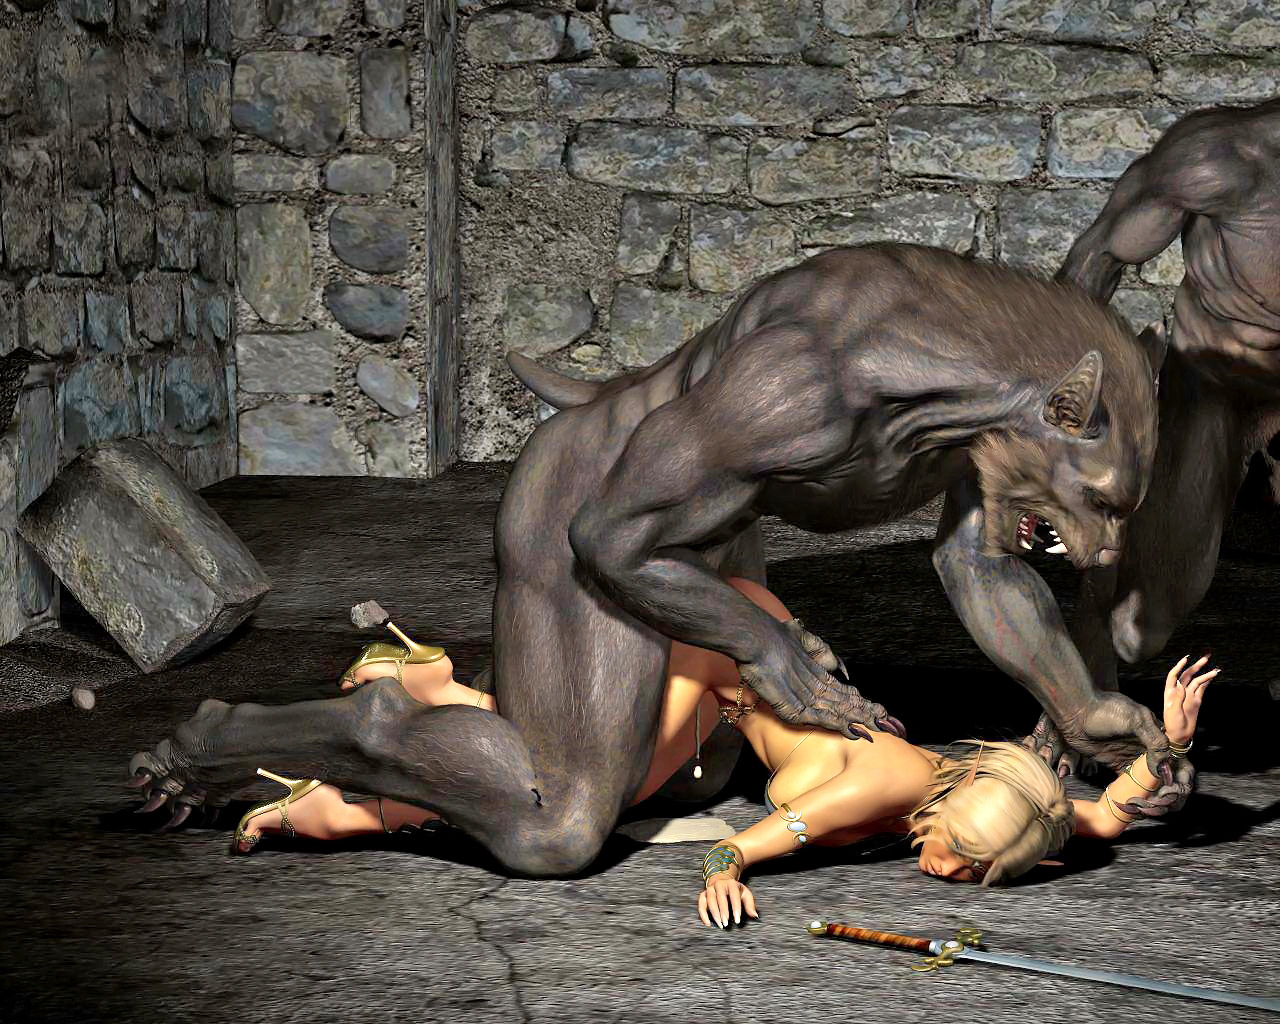 Brutally buttfucked by werewolves â€“ 3D RPG animation anal sex at  Hd3dMonsterSex.com